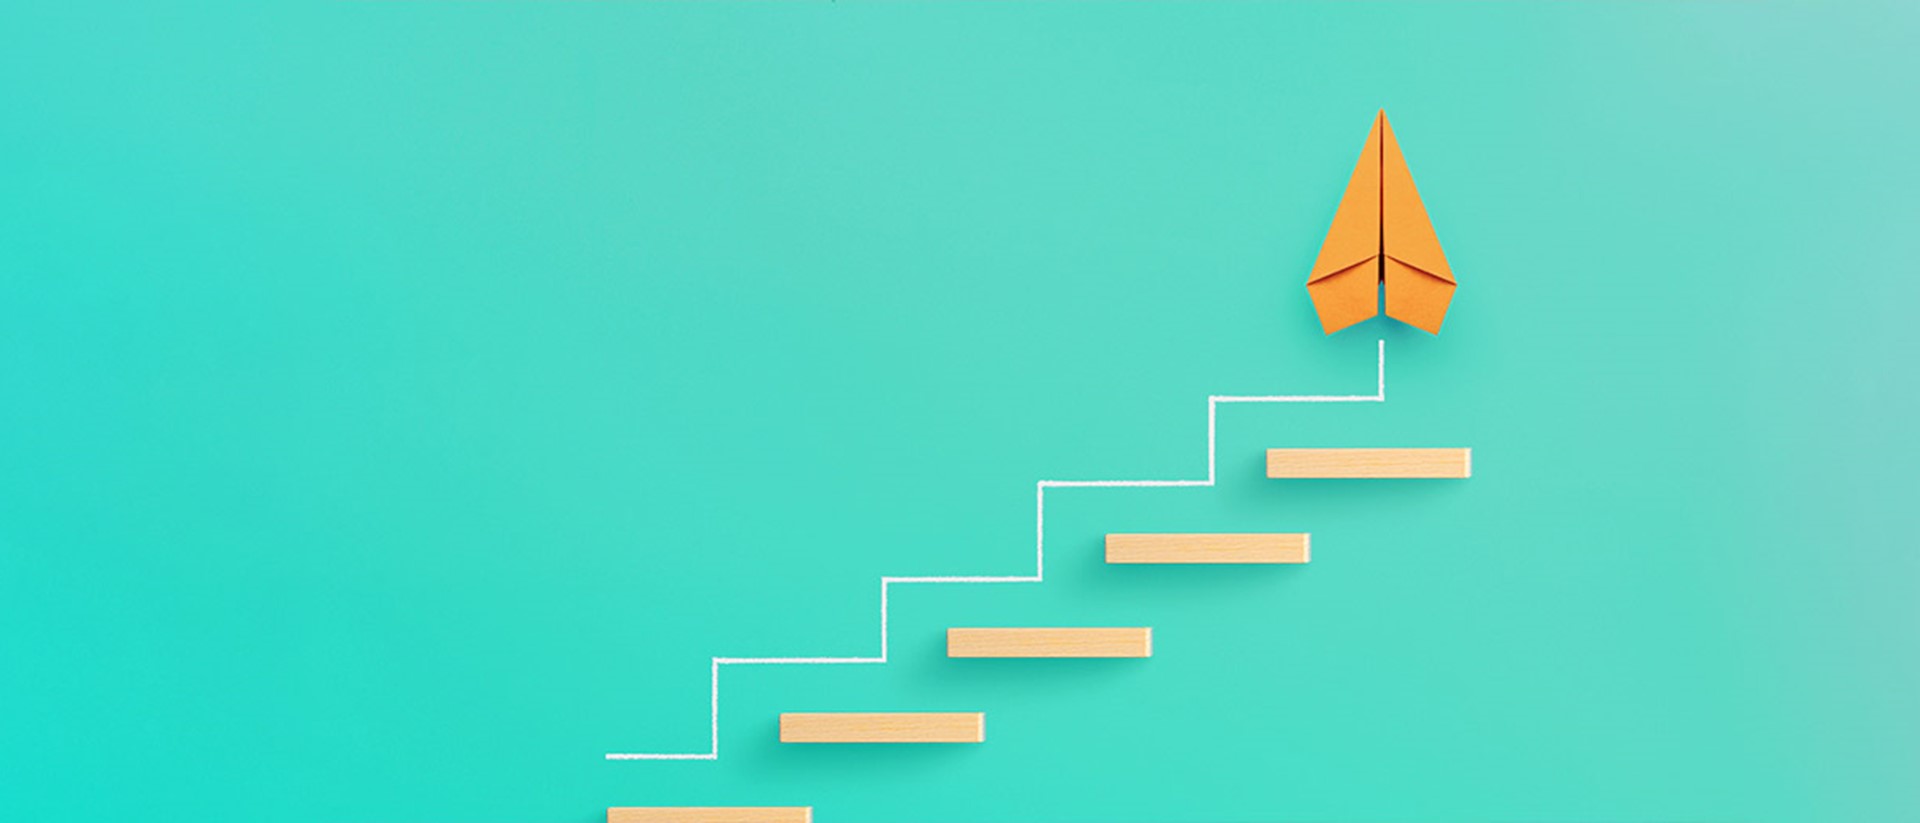 Image of an orange paper airplane going up some steps on a teal background